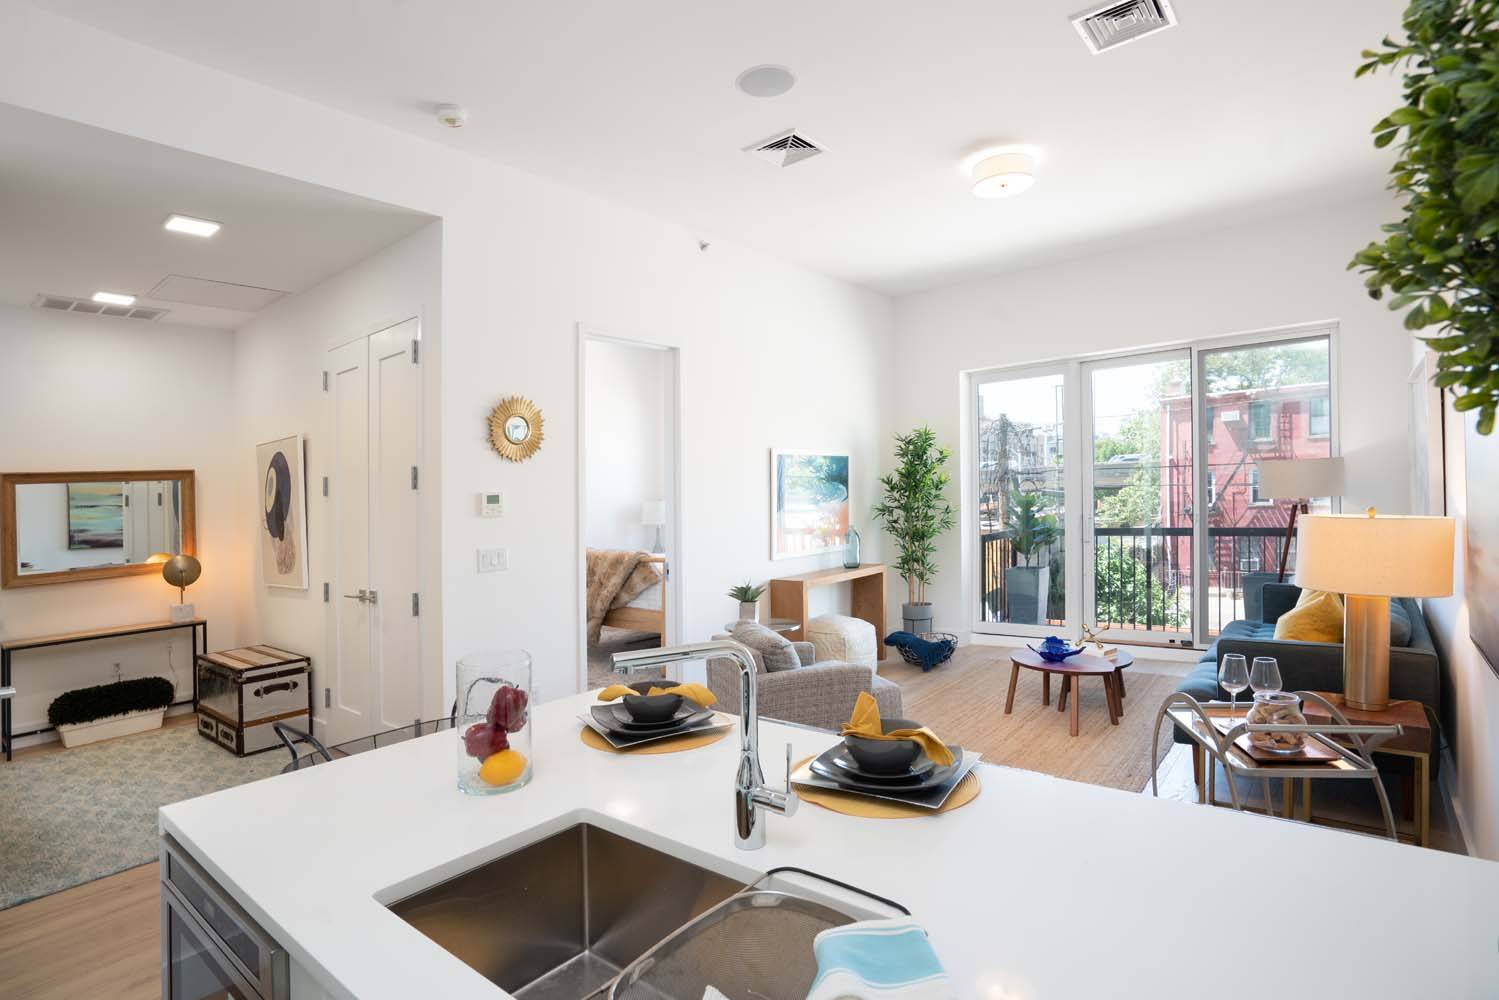 Showing by appointment. INTRODUCING The ASTRAL Condominiums 11 CONSELYEA STREET A collection of MODERN spacious condo residences in the heart of Williamsburg Brooklyn.